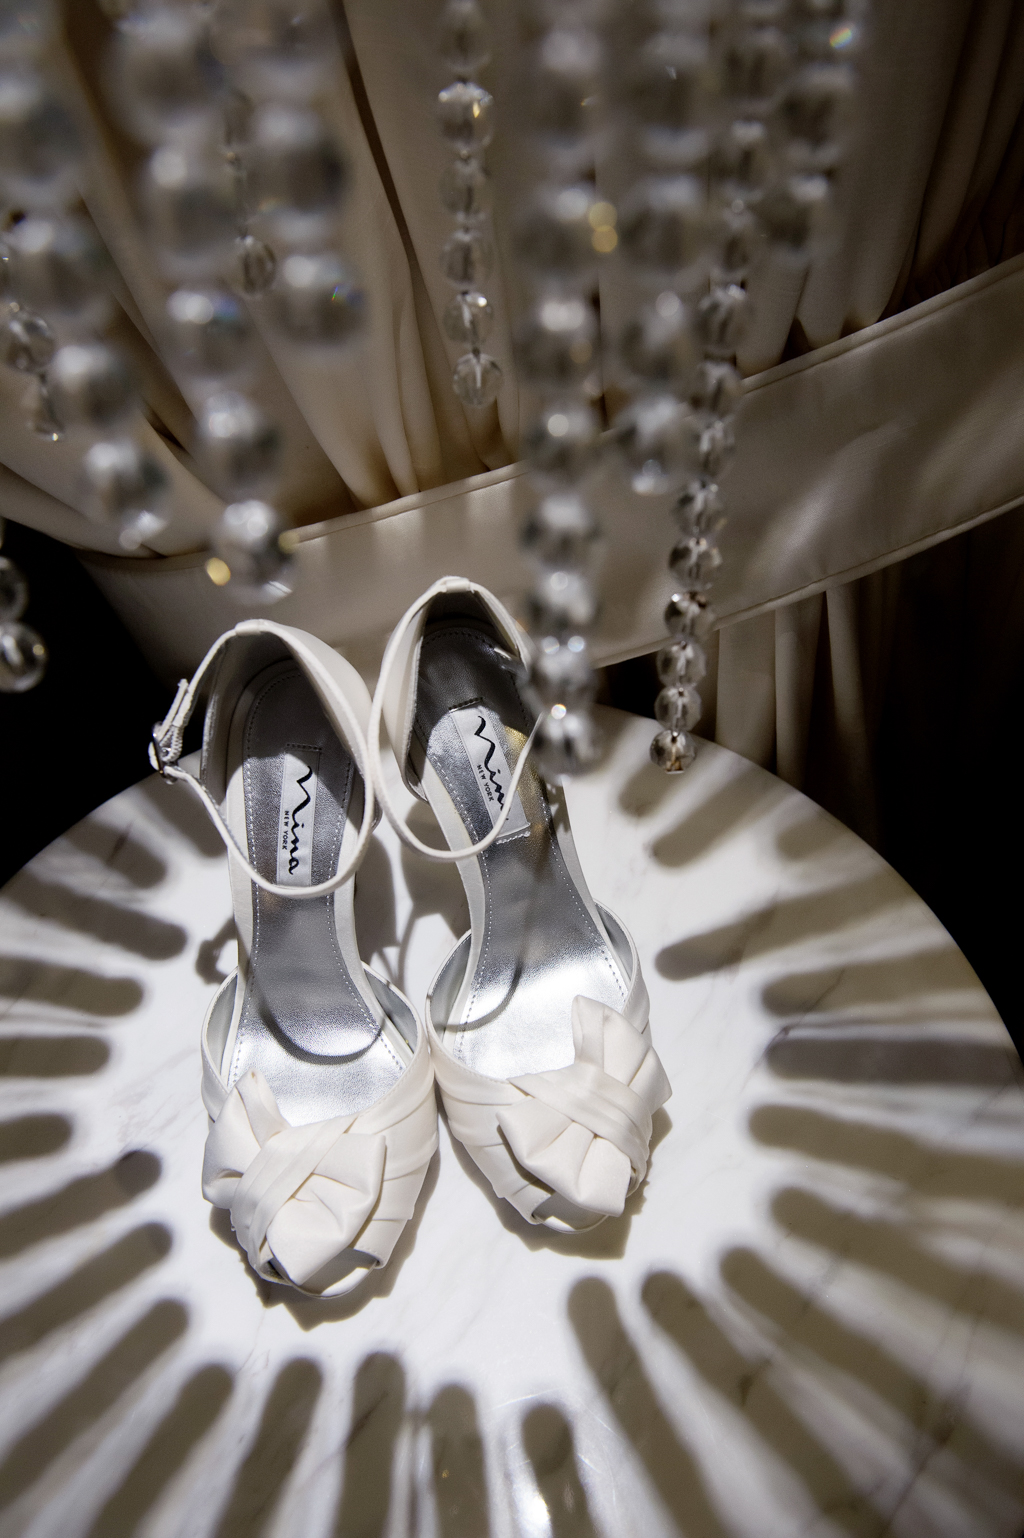 white shoes on a table covered in shadows from a crystal lamp